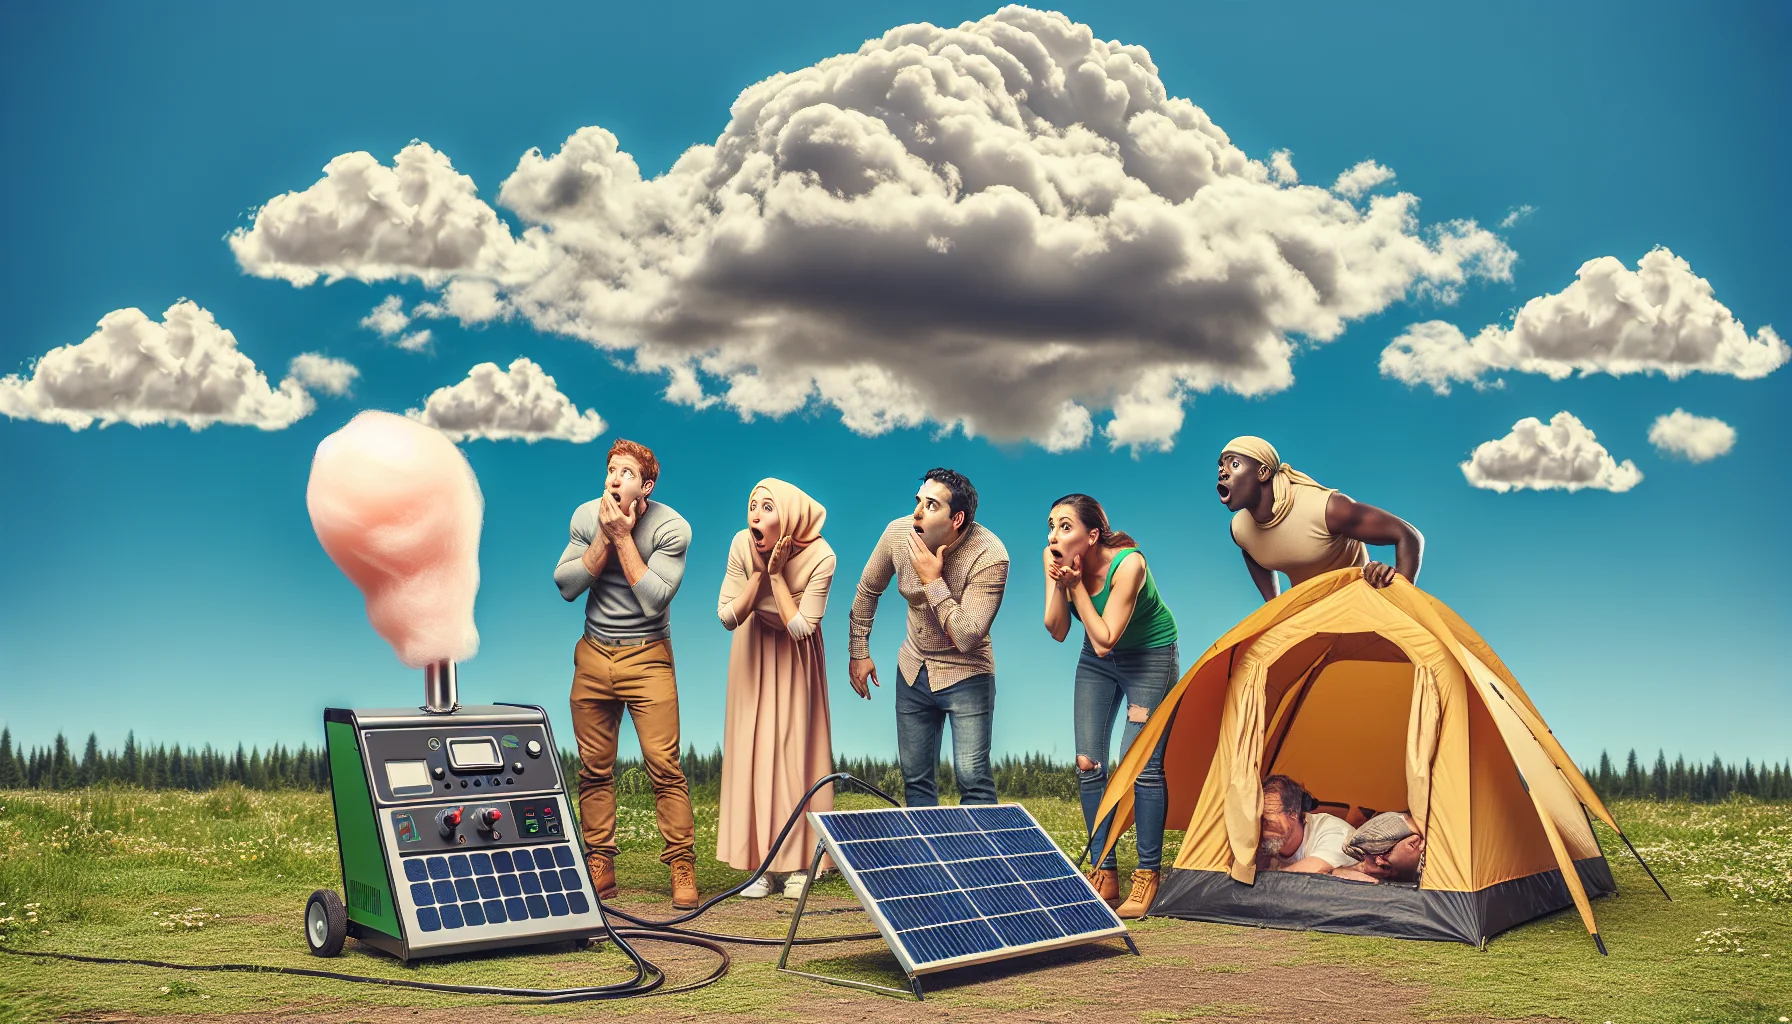 Create a humorous image featuring a generic solar generator. Picture it on a peaceful sunny day at an outdoor camping site. Imagine a group of surprised campers: a Caucasian man, a Middle-Eastern woman, a Hispanic woman and a South-Asian man, looking in awe as the small solar generator beside their tent powers a massive apparatus like a candy floss machine or a movie projector. Fluffy clouds in the blue sky above add a cheerful touch, underlying the theme of green energy.